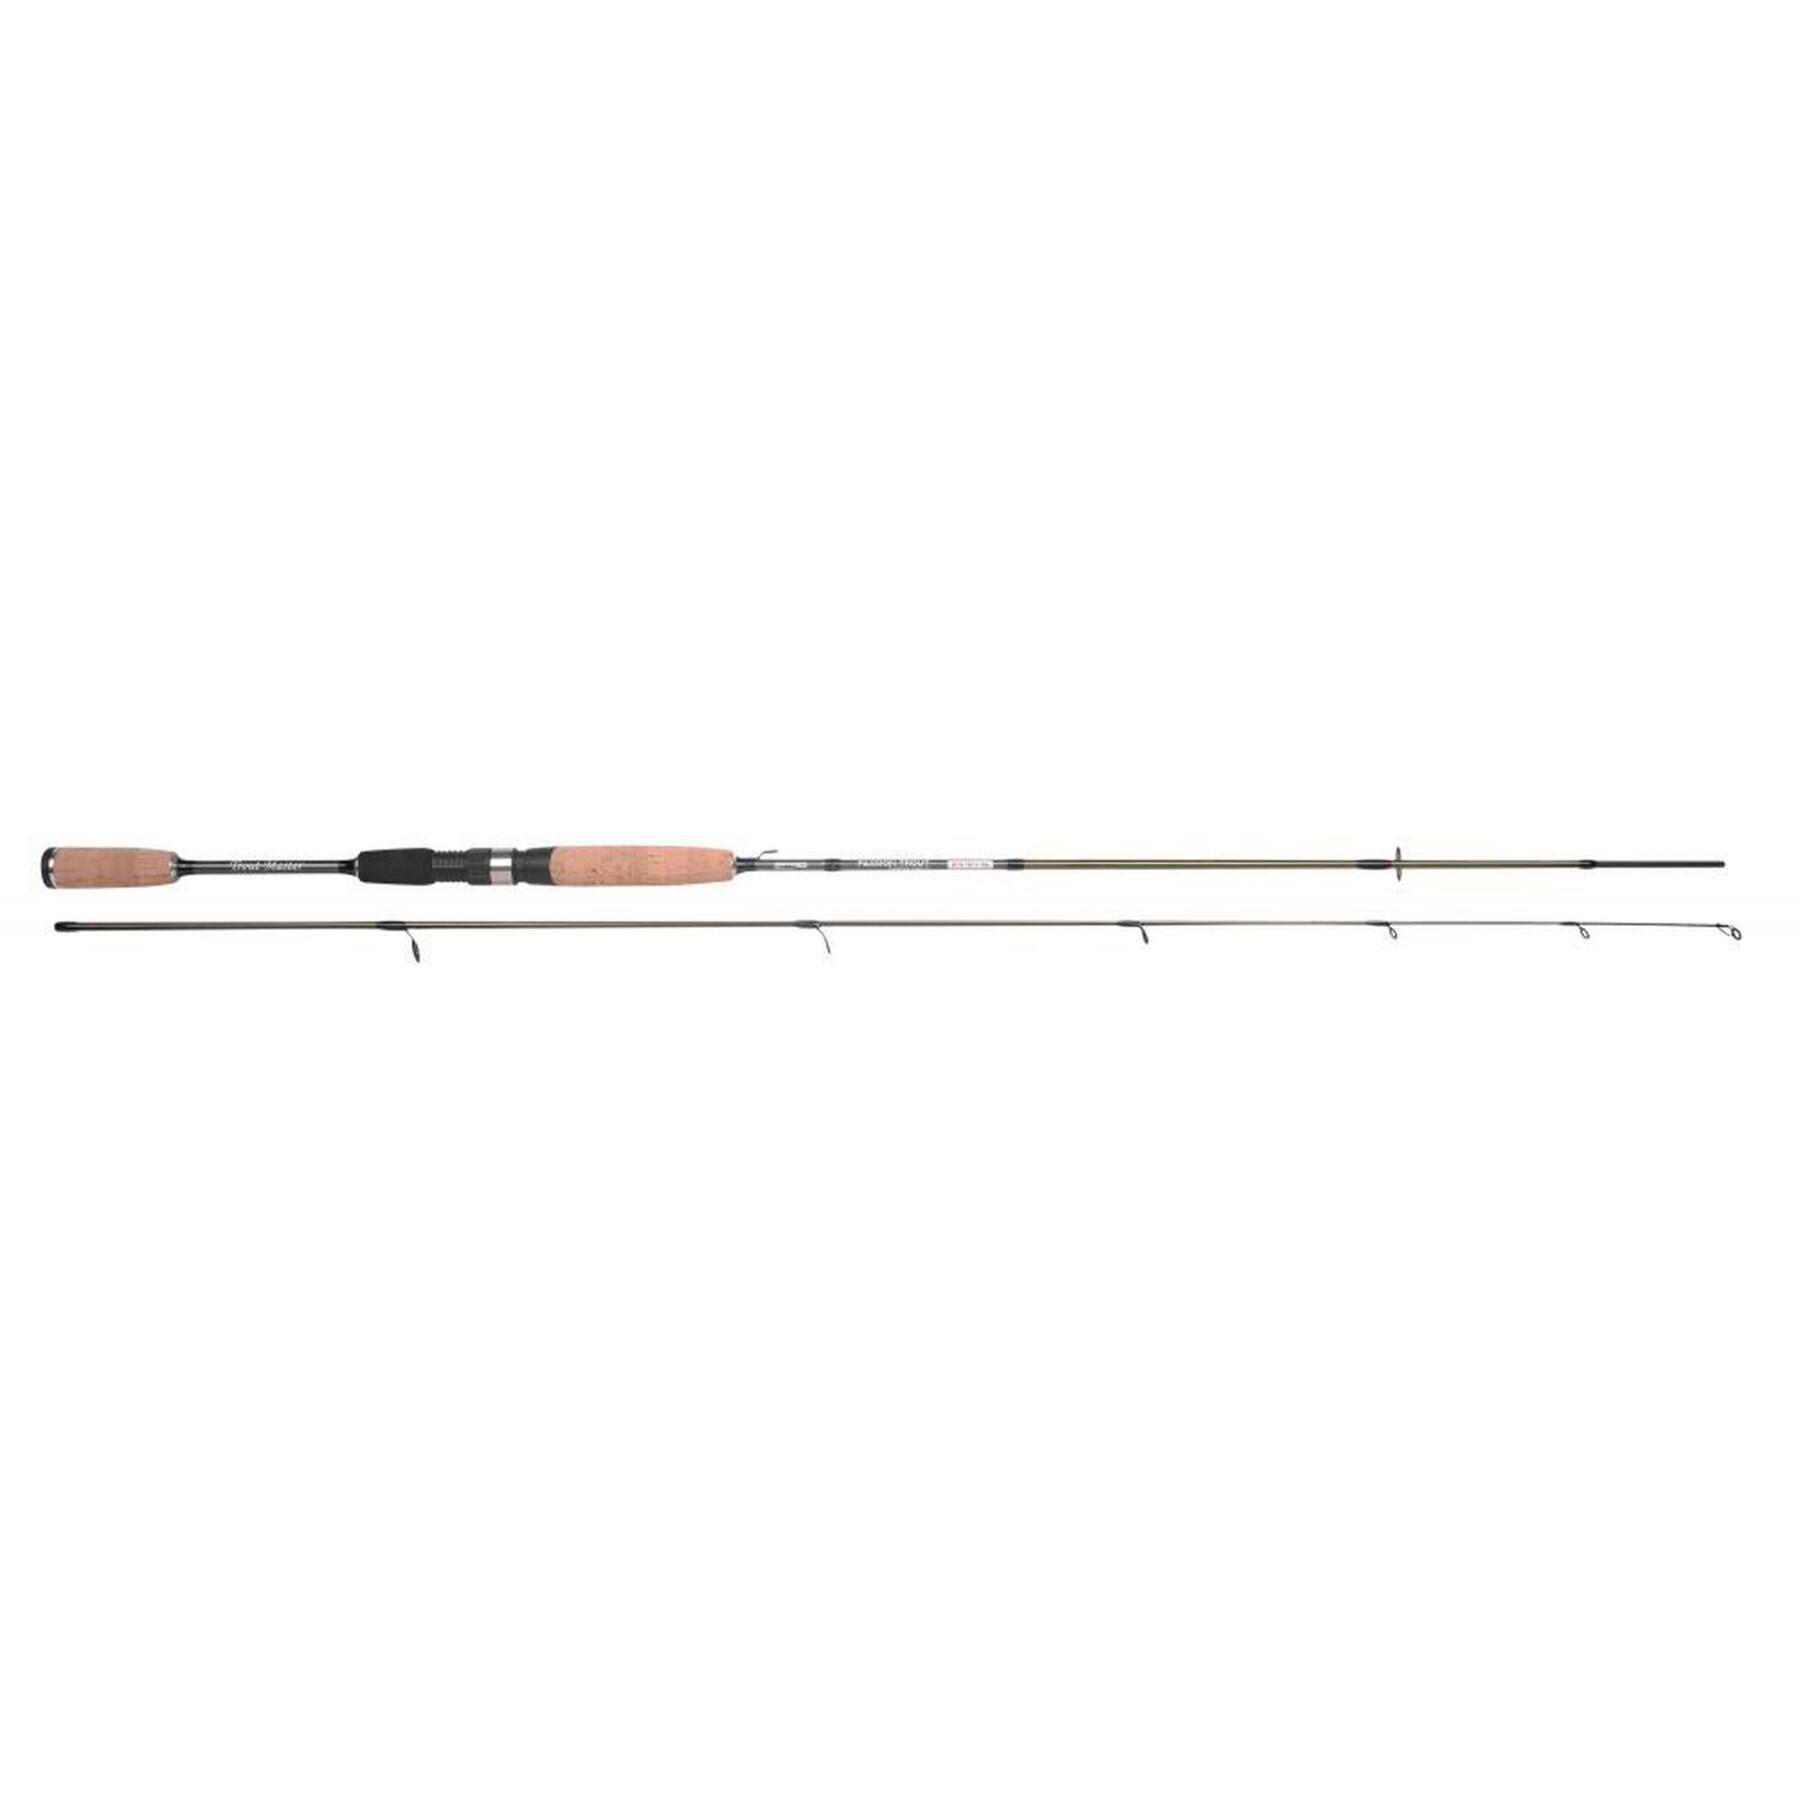 Spinstang Spro passion trout 3-10g